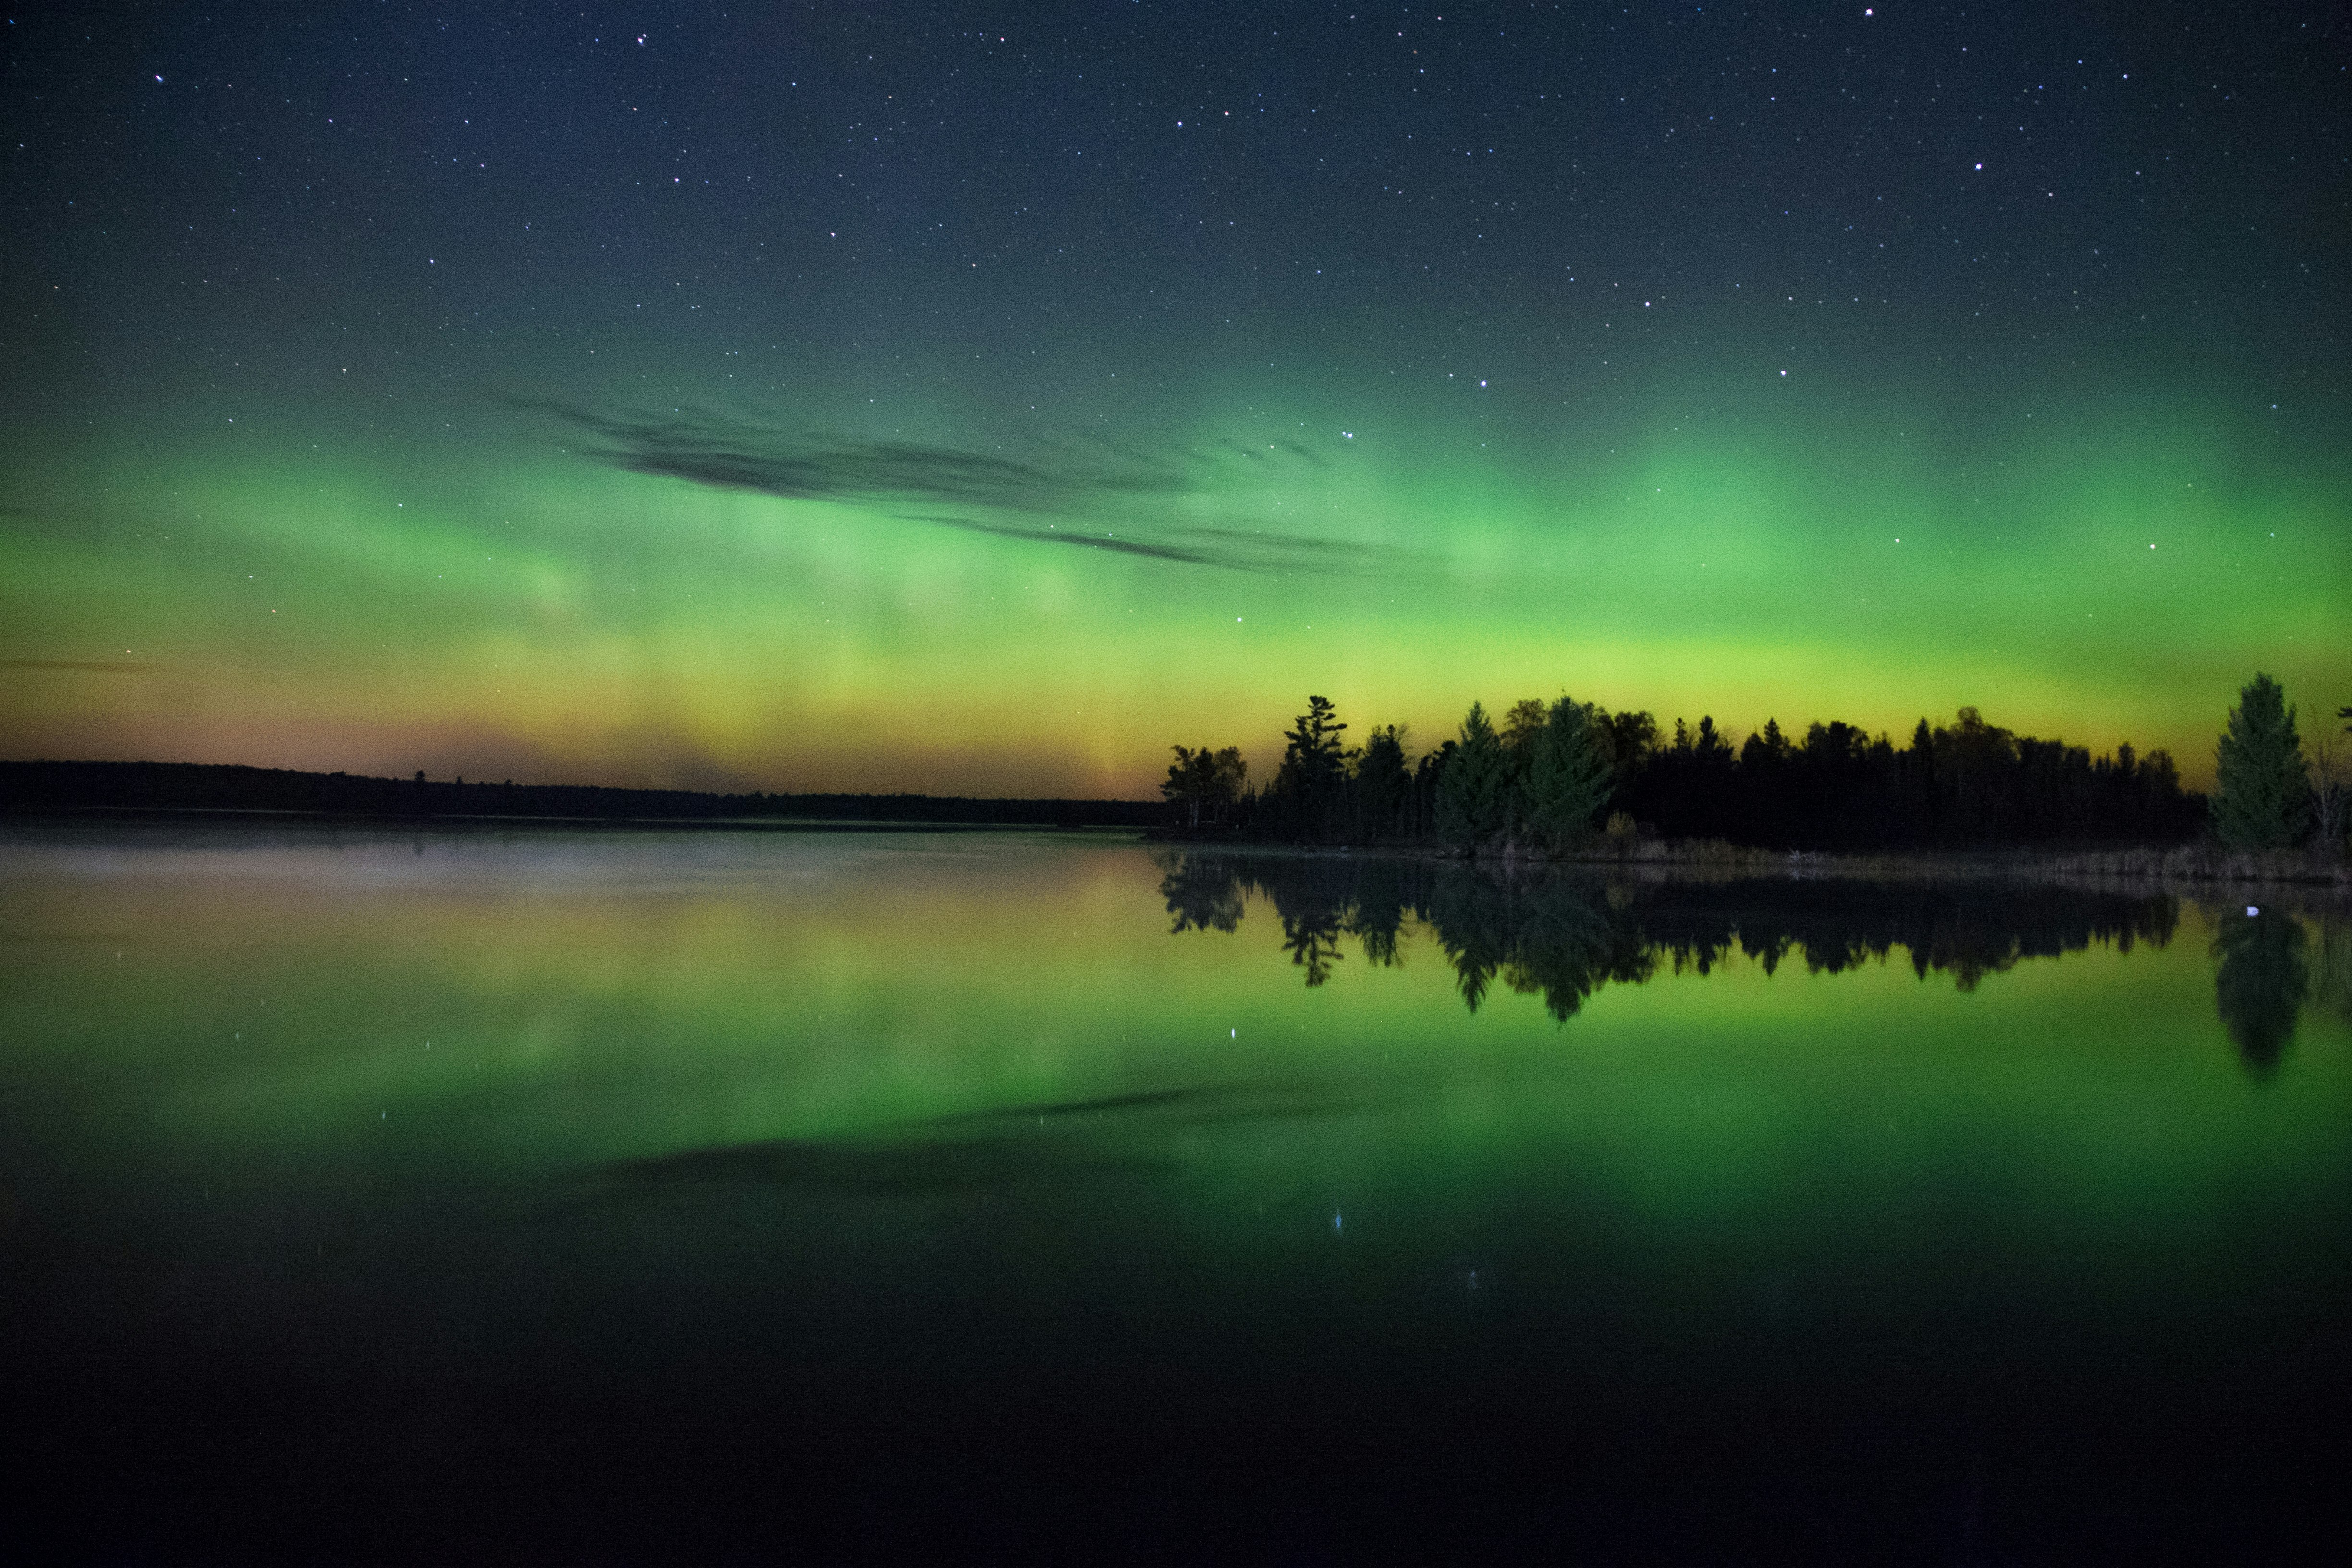 green and yellow aurora borealis reflected on water